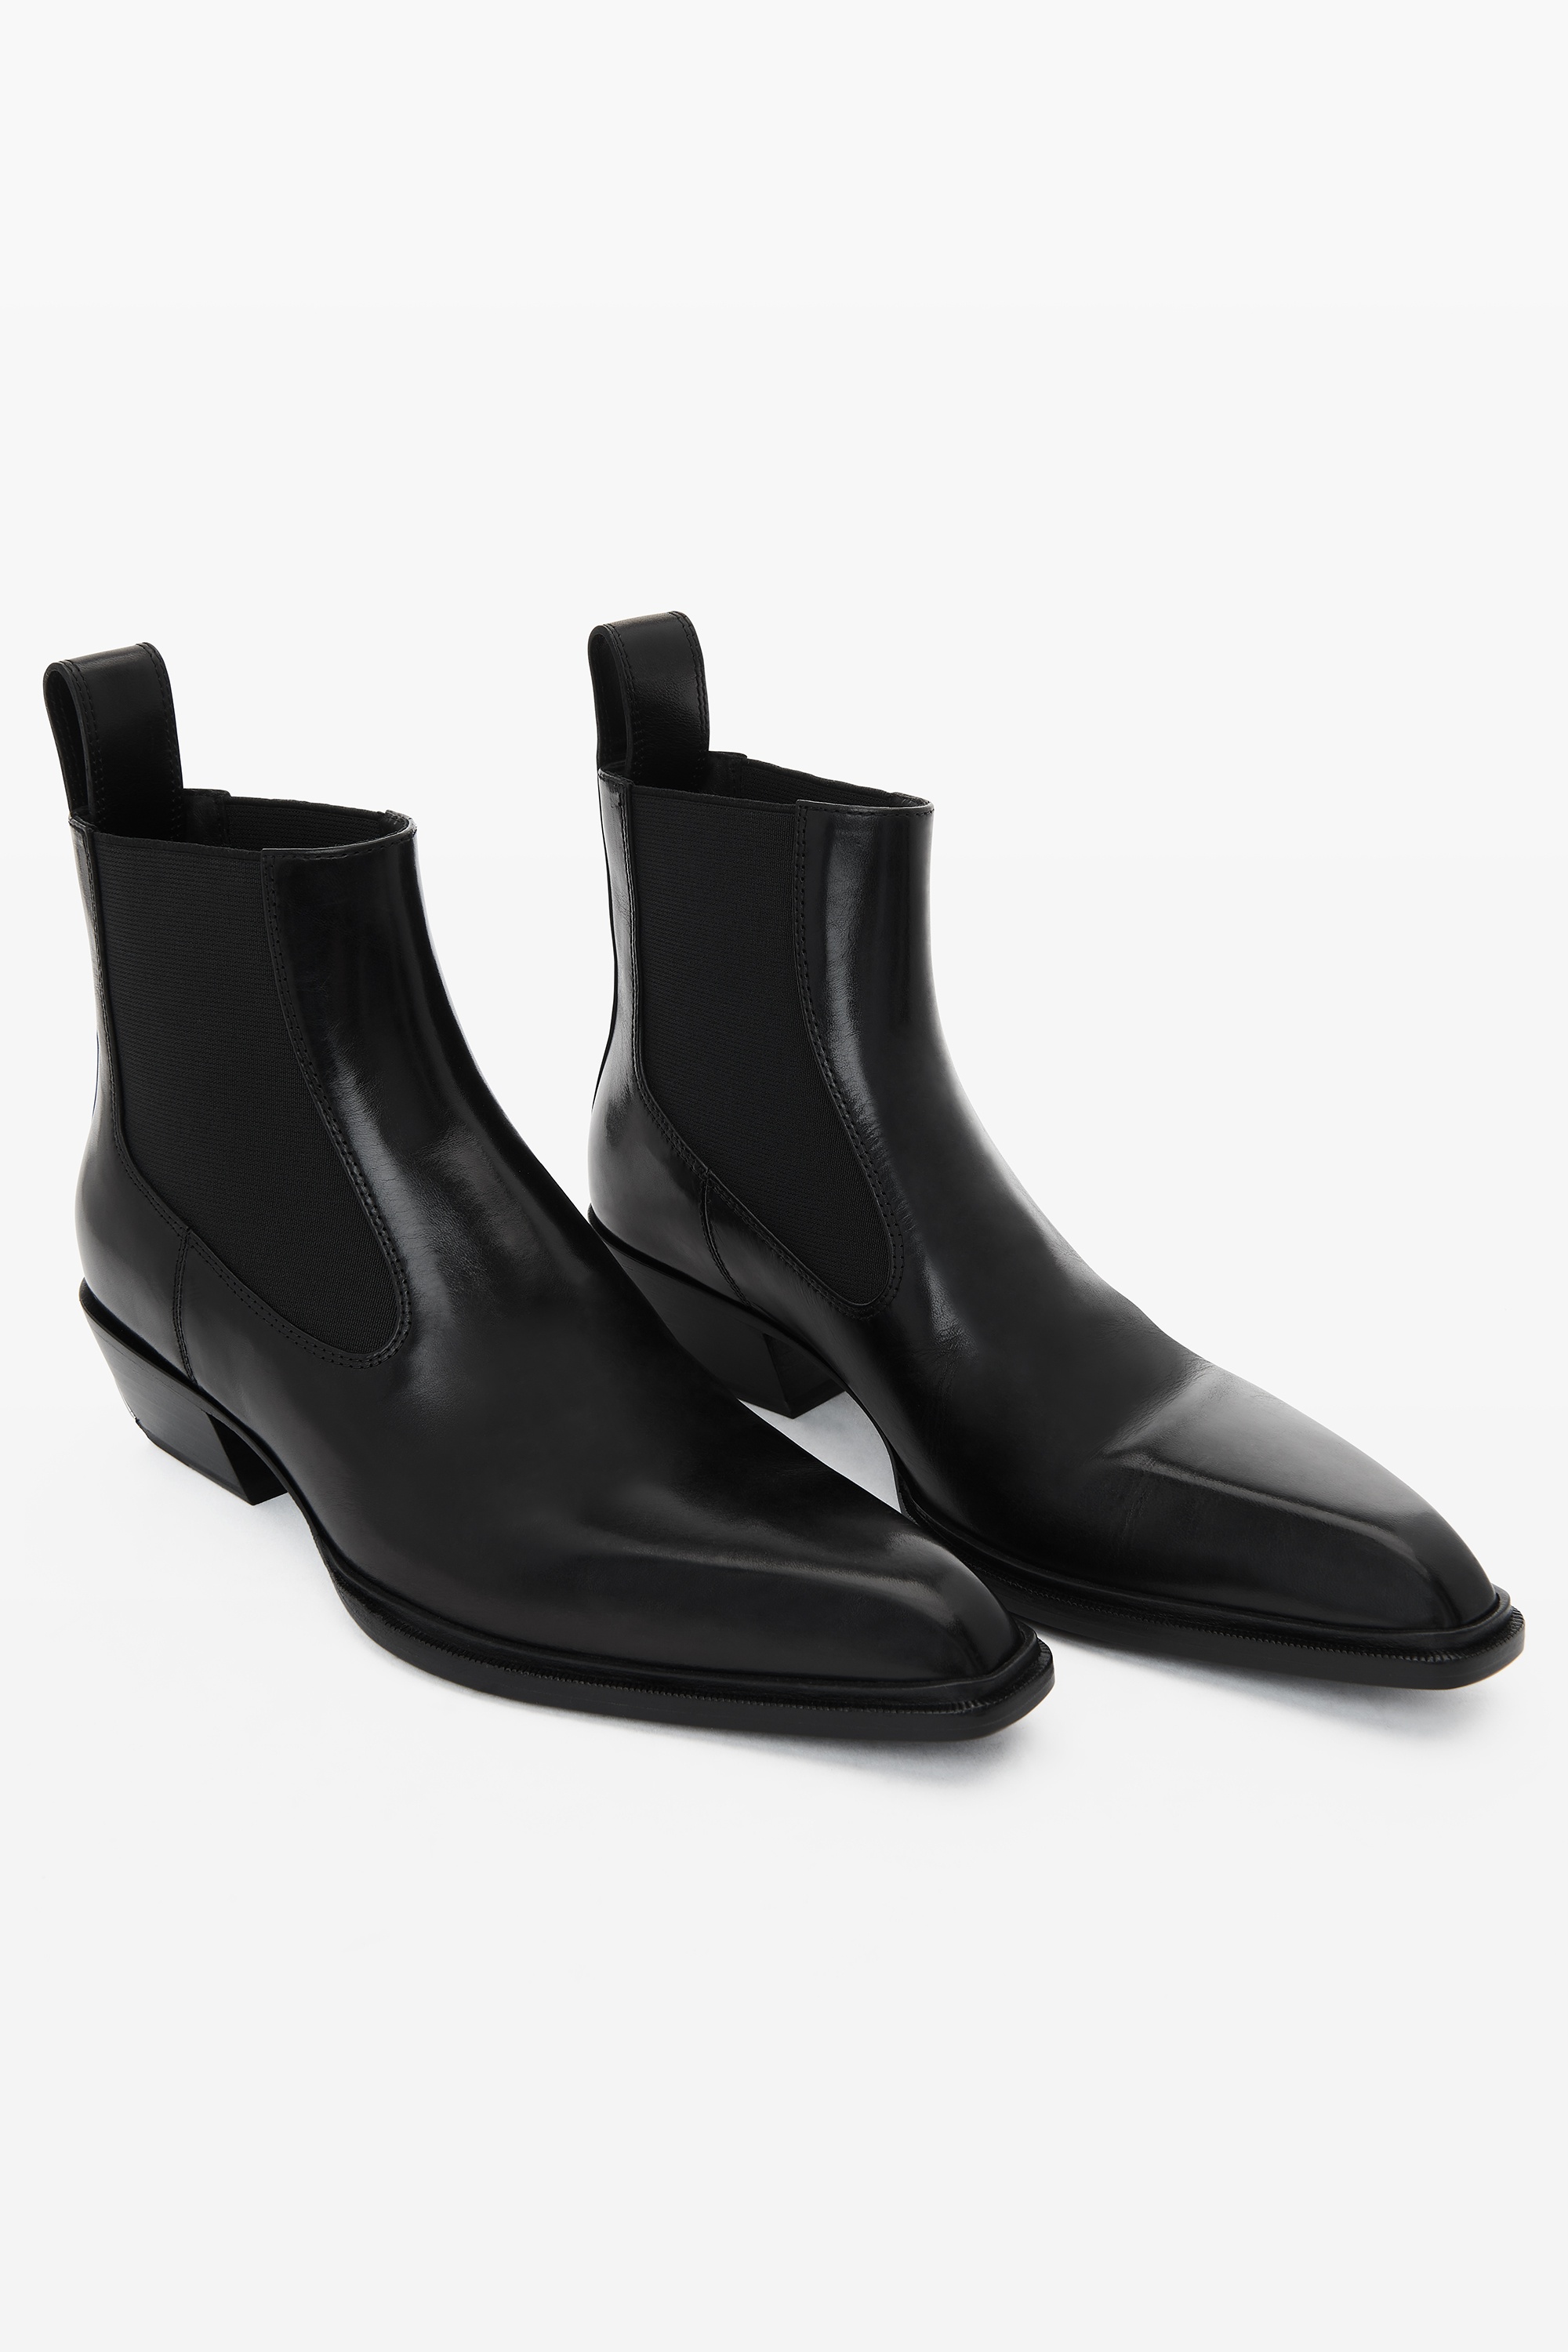 slick smooth leather  ankle boot - 2